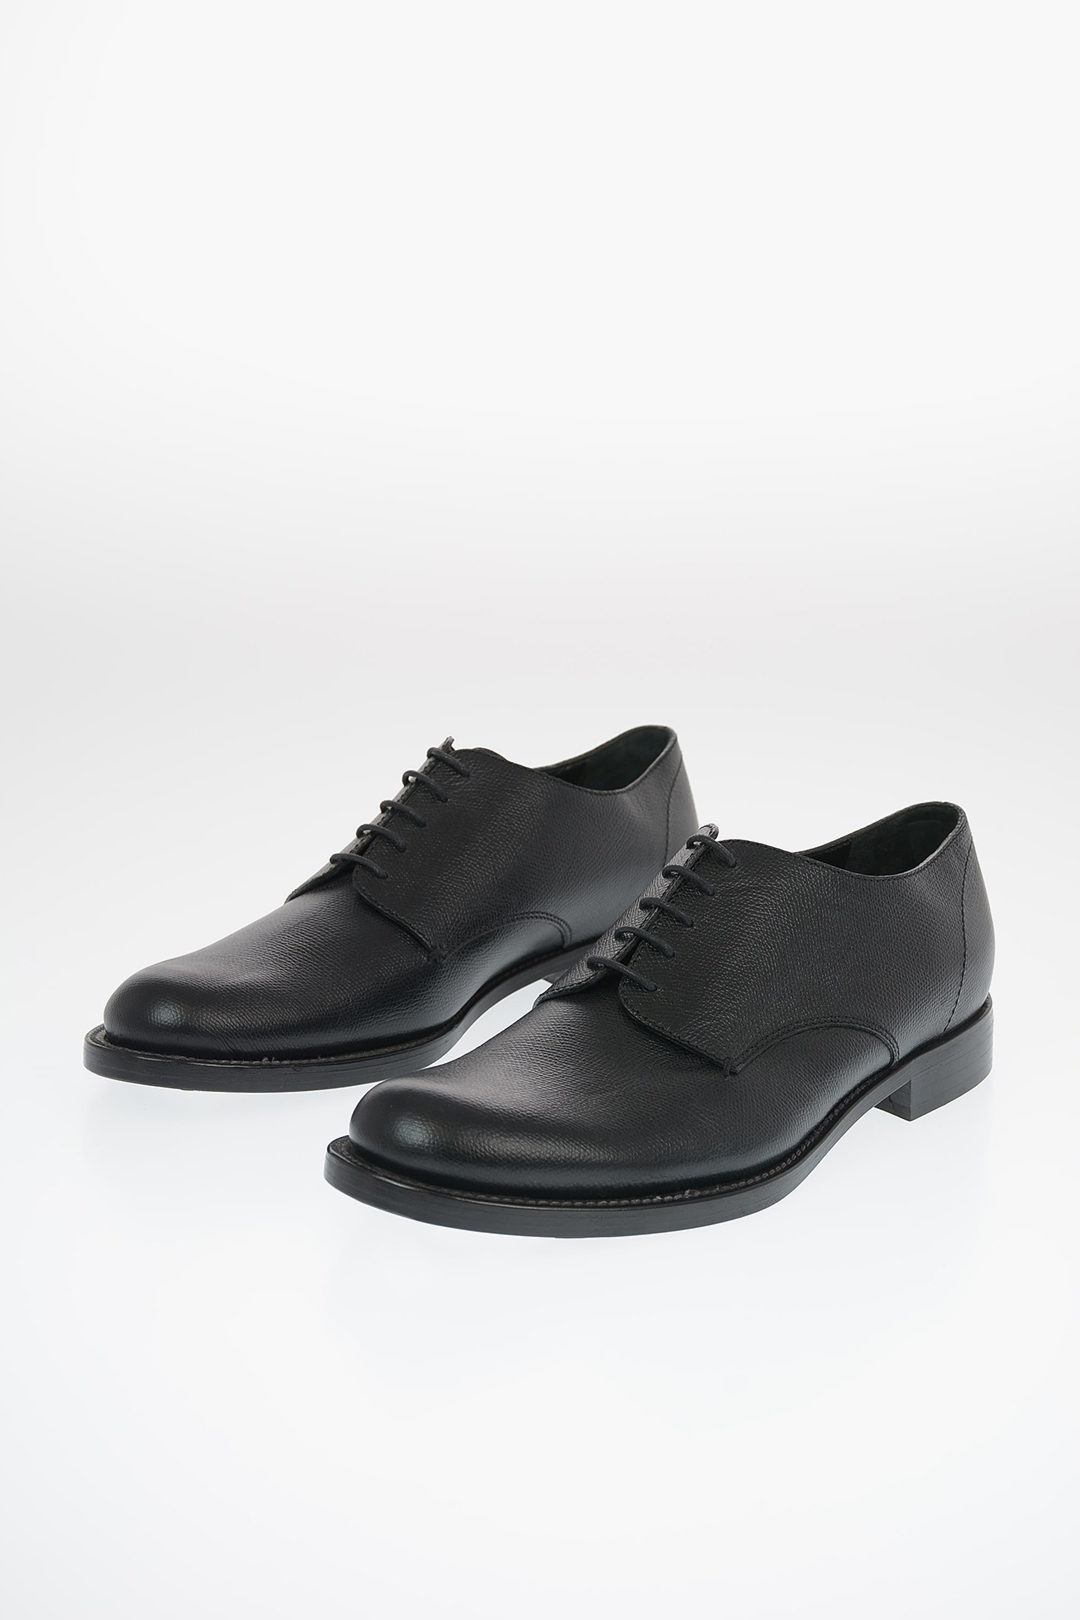 Marni leather Derby shoes men - Glamood Outlet